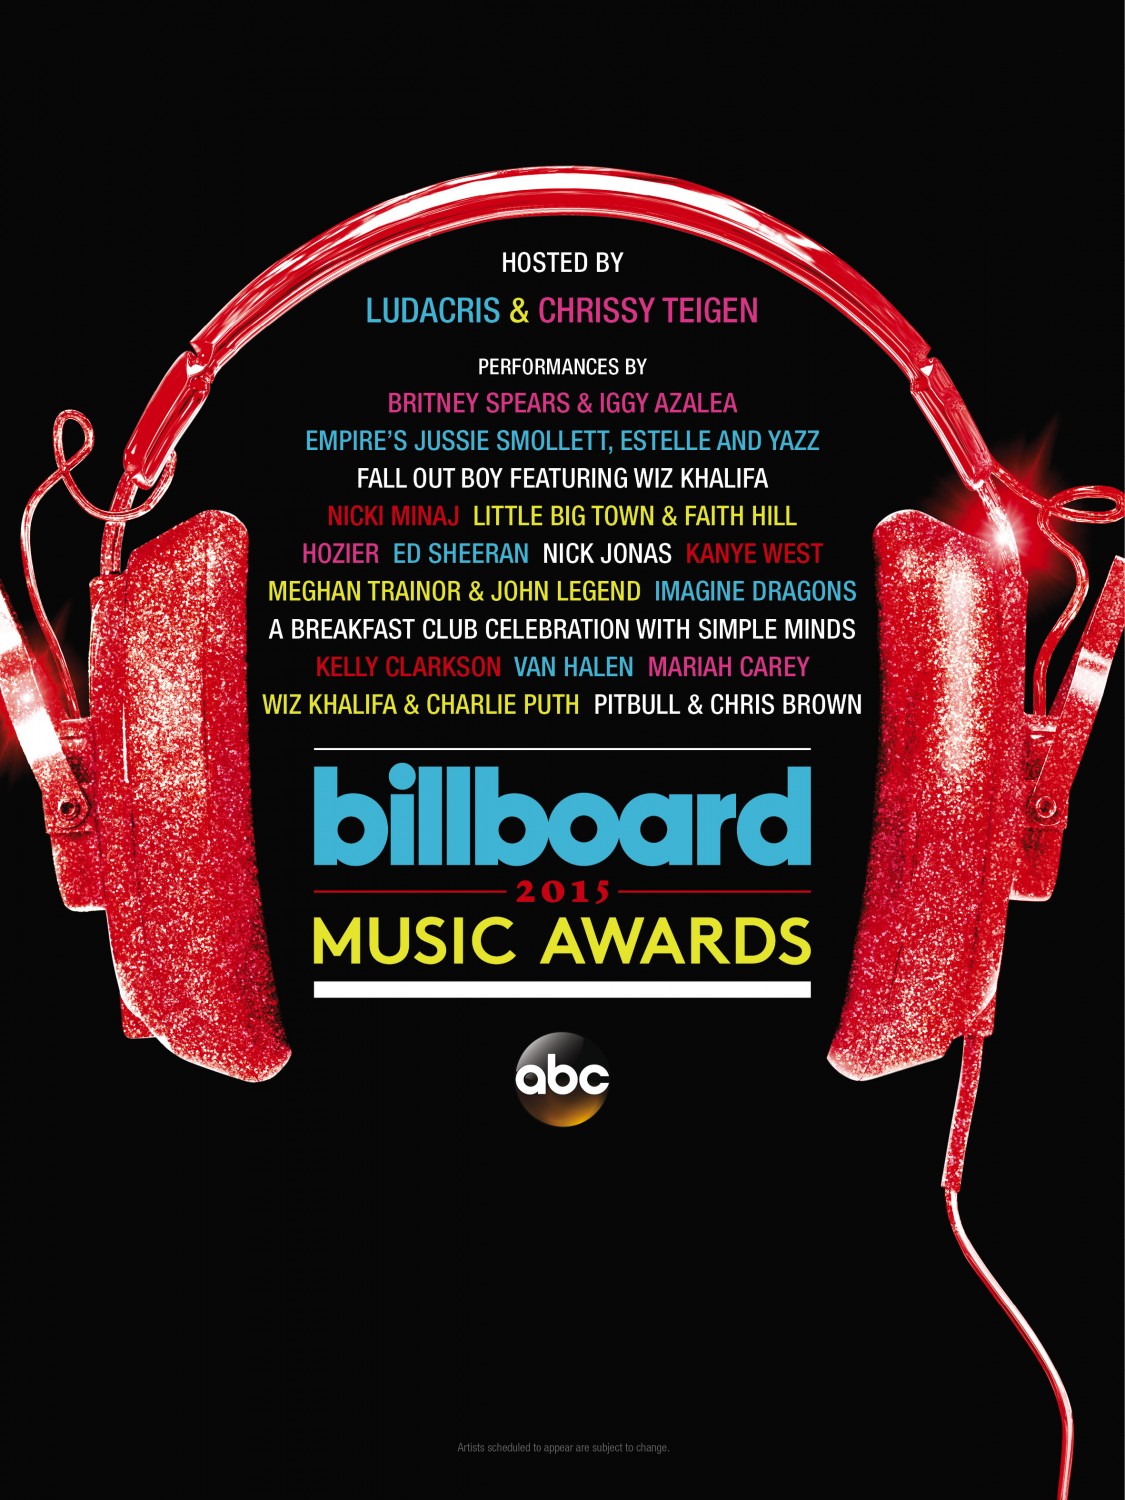 Extra Large TV Poster Image for 2015 Billboard Music Awards (#7 of 7)